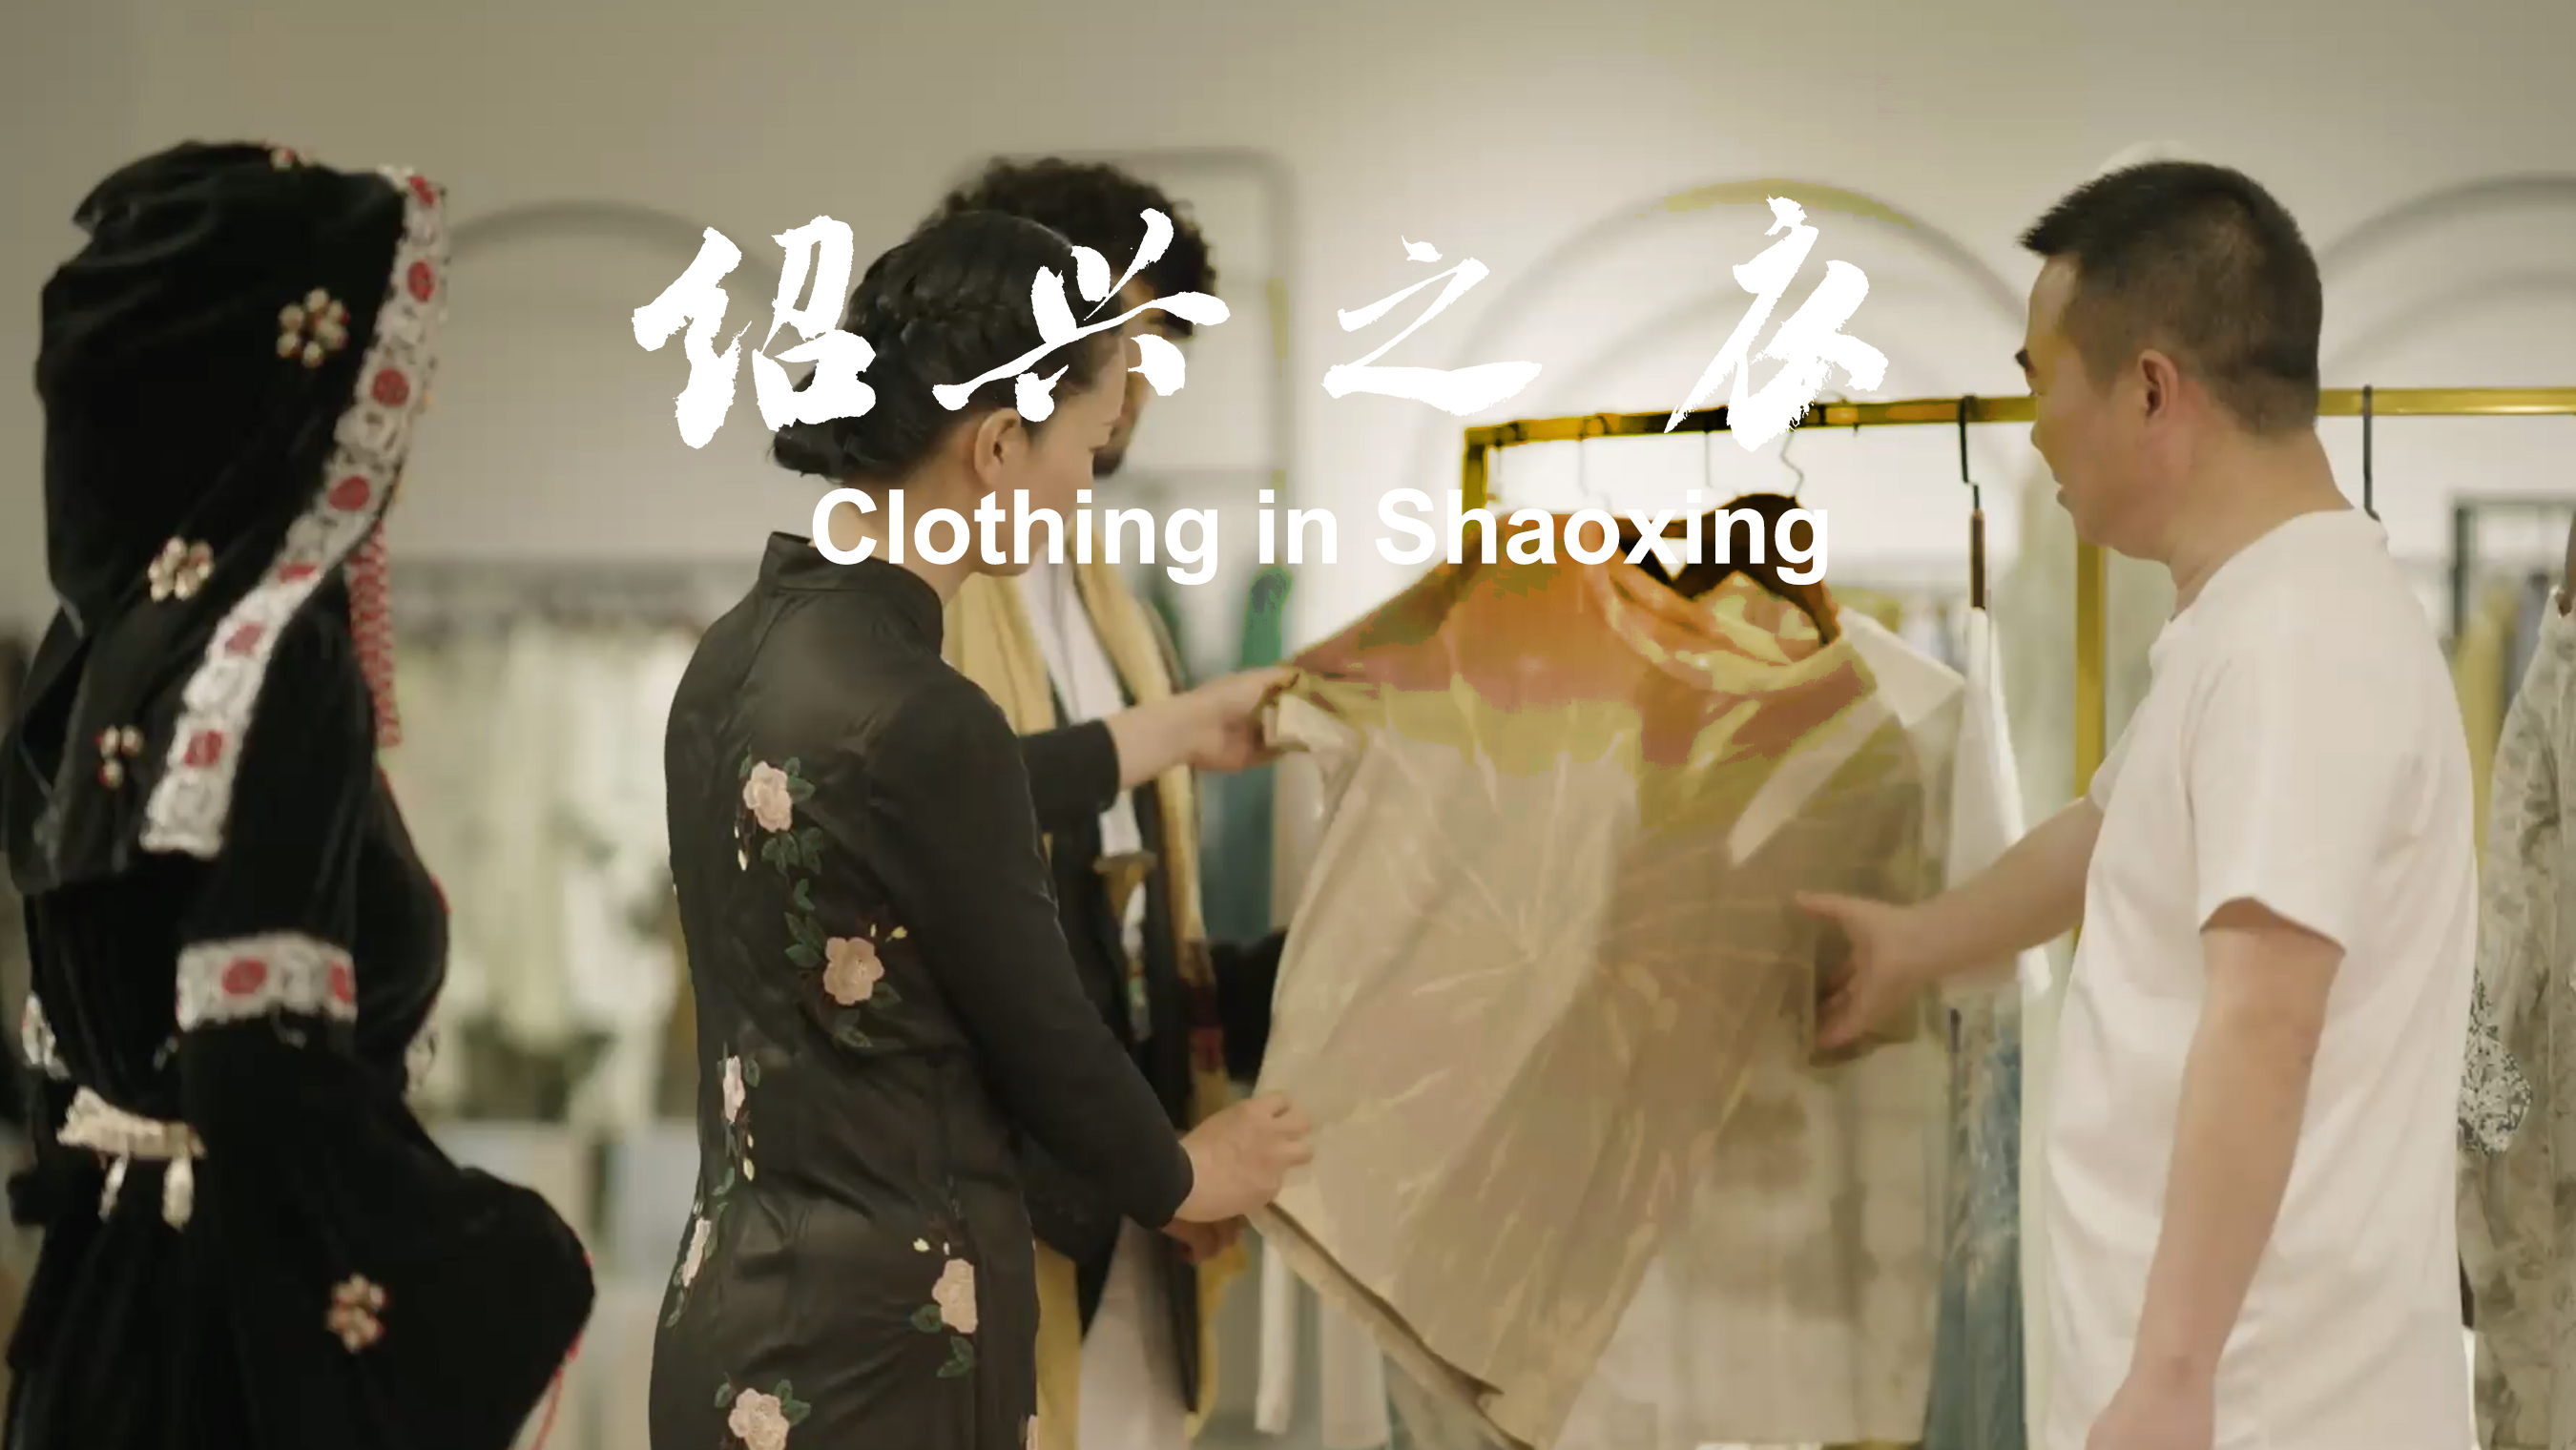 Clothing in Shaoxing